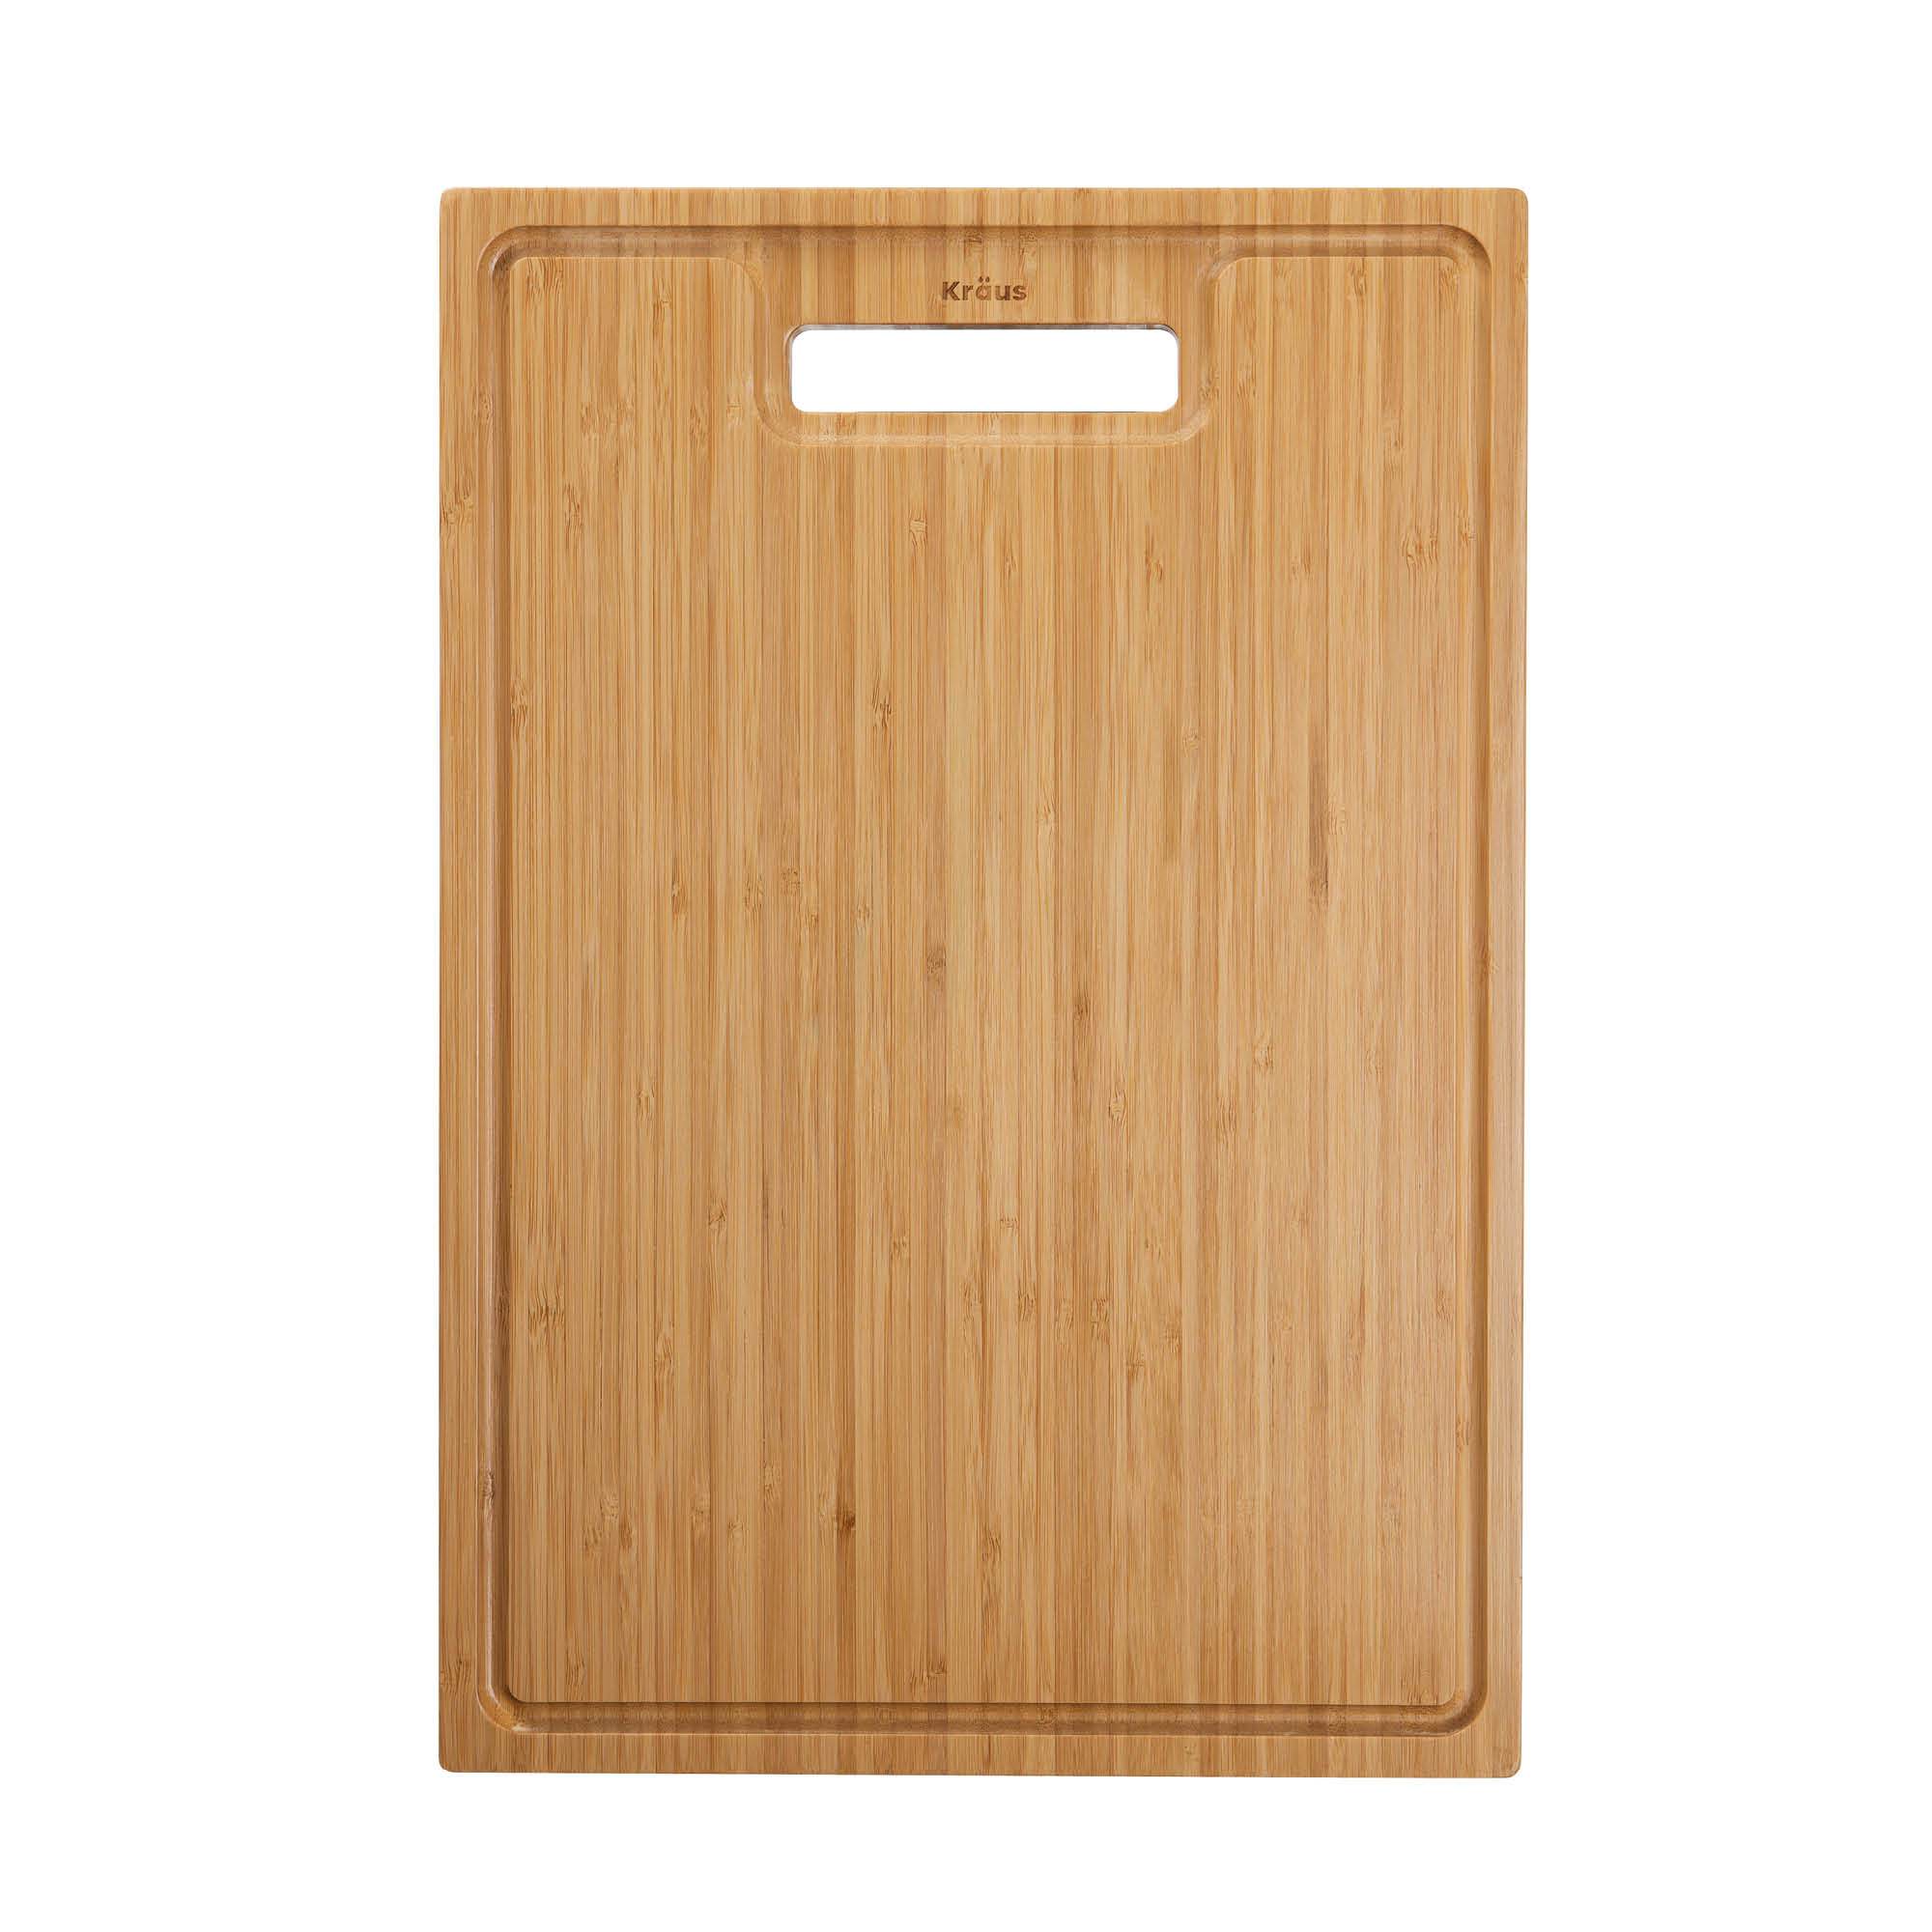 Kraus KCB-101BB Organic Solid Bamboo Cutting Board for Kitchen Sink 17.5  inch x 12 inch in Bamboo